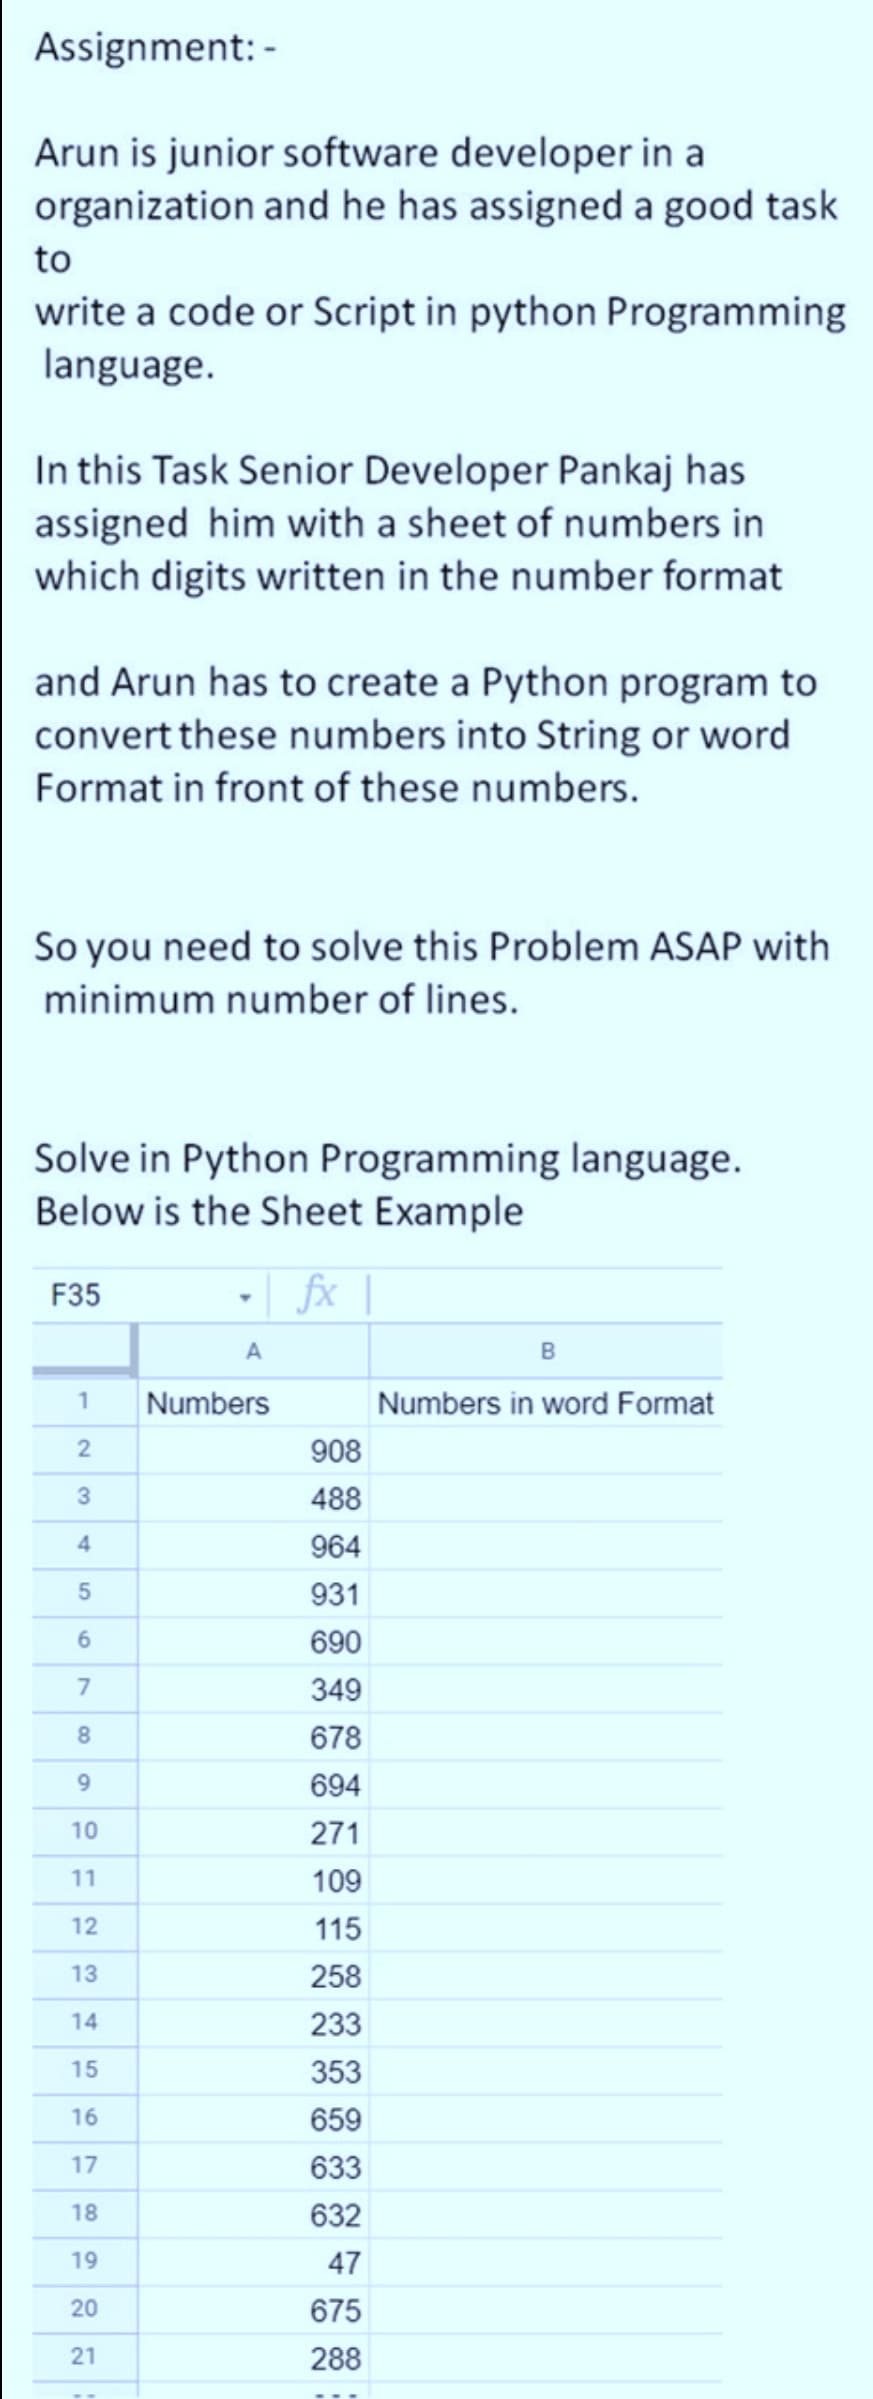 Assignment: -
Arun is junior software developer in a
organization and he has assigned a good task
to
write a code or Script in python Programming
language.
In this Task Senior Developer Pankaj has
assigned him with a sheet of numbers in
which digits written in the number format
and Arun has to create a Python program to
convert these numbers into String or word
Format in front of these numbers.
So you need to solve this Problem ASAP with
minimum number of lines.
Solve in Python Programming language.
Below is the Sheet Example
-| fx
F35
Numbers
Numbers in word Format
908
3
488
4
964
931
6.
690
349
678
9.
694
10
271
11
109
12
115
13
258
14
233
15
353
16
659
17
633
18
632
19
47
20
675
21
288
7.
2.
